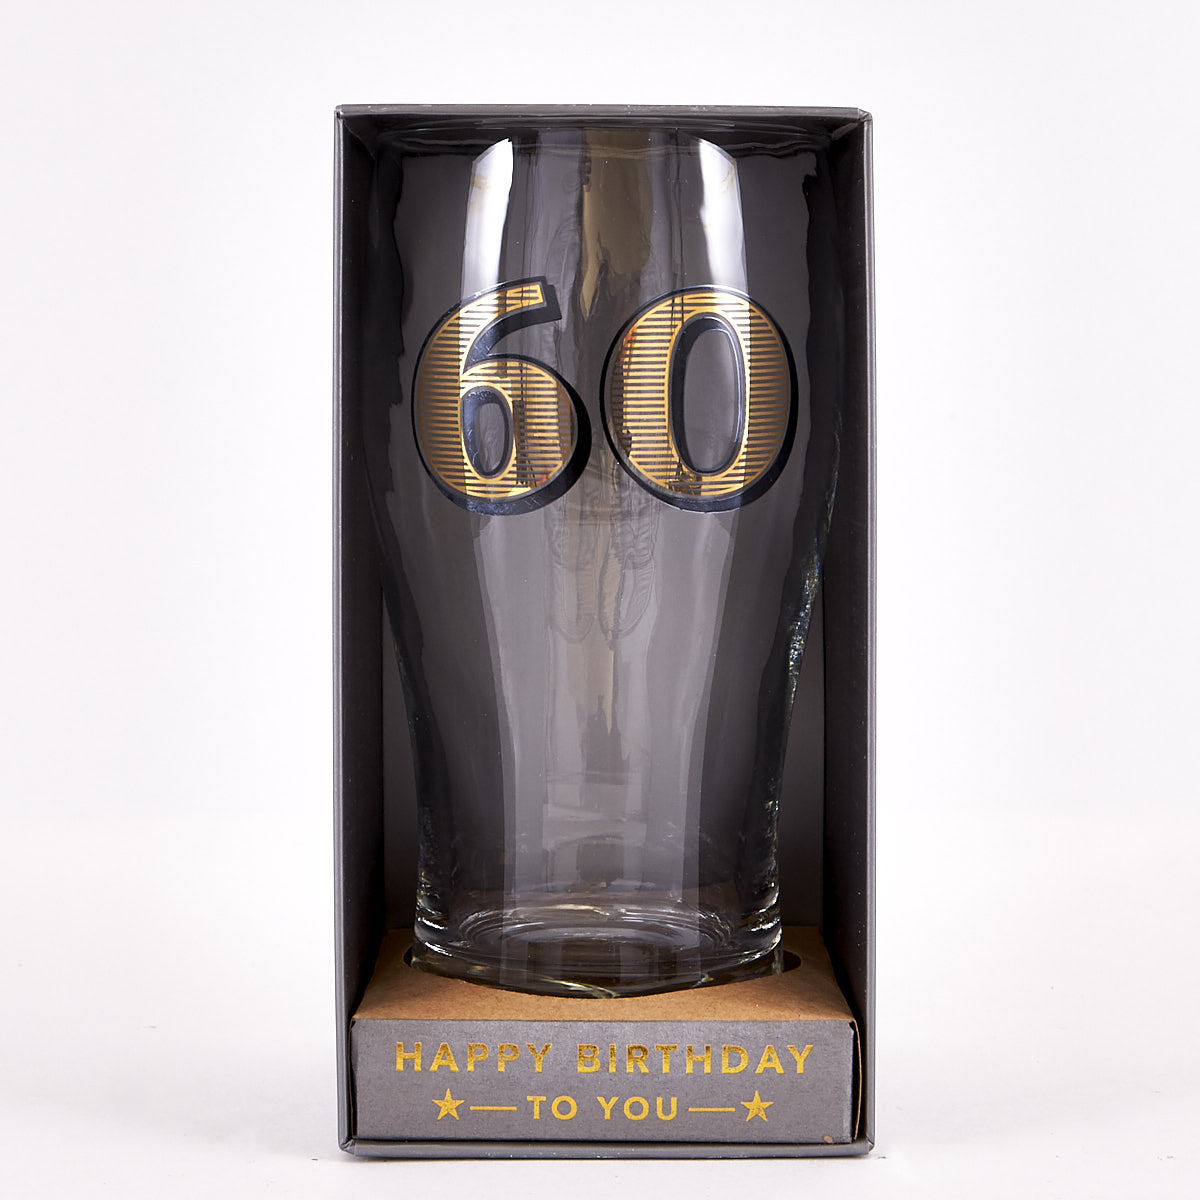 60th Birthday Pint Glass - Classic Collection